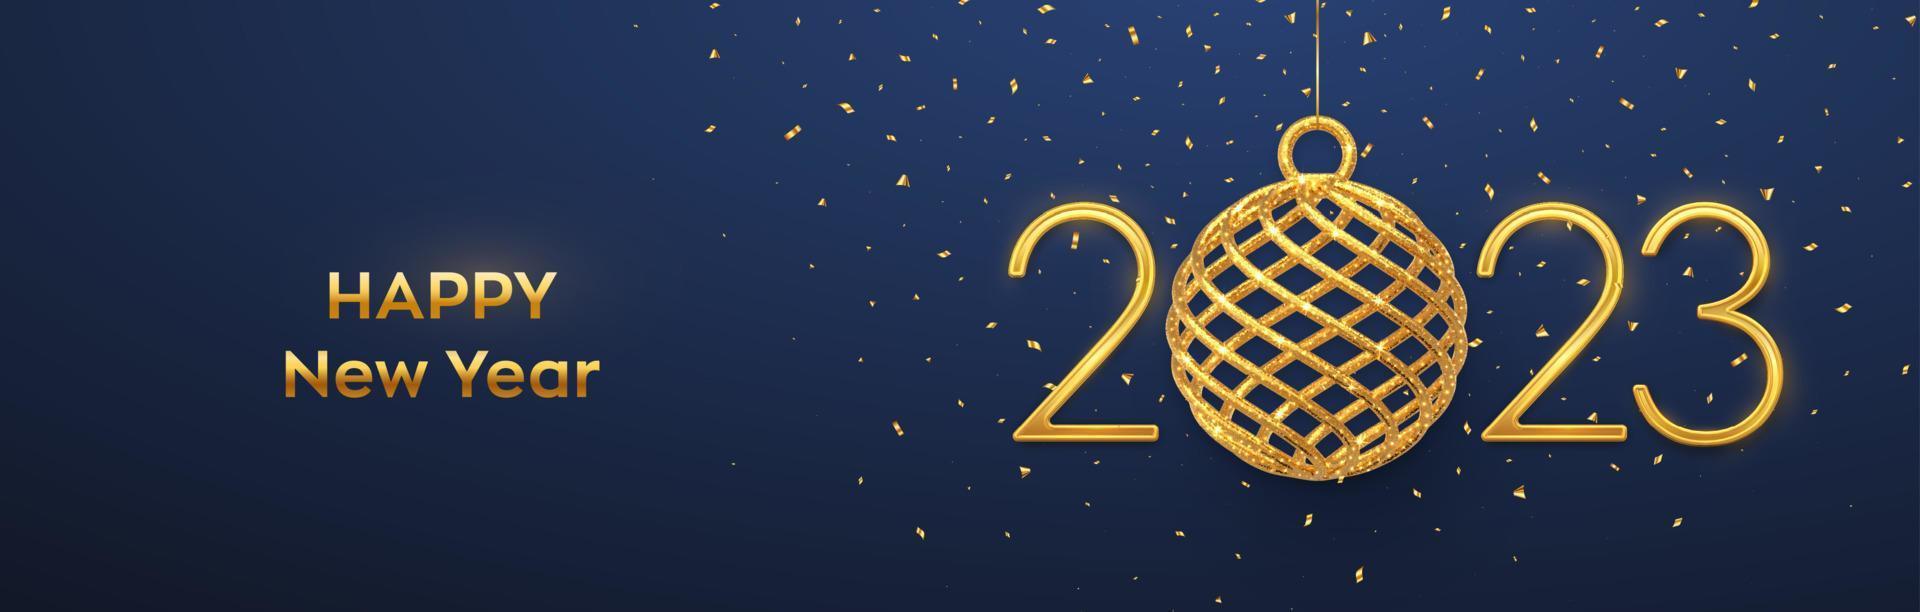 Happy New 2023 Year. Hanging Golden metallic numbers 2023 with shining 3D gold ball bauble and confetti on blue background. New Year greeting card, banner, header template. Vector illustration.